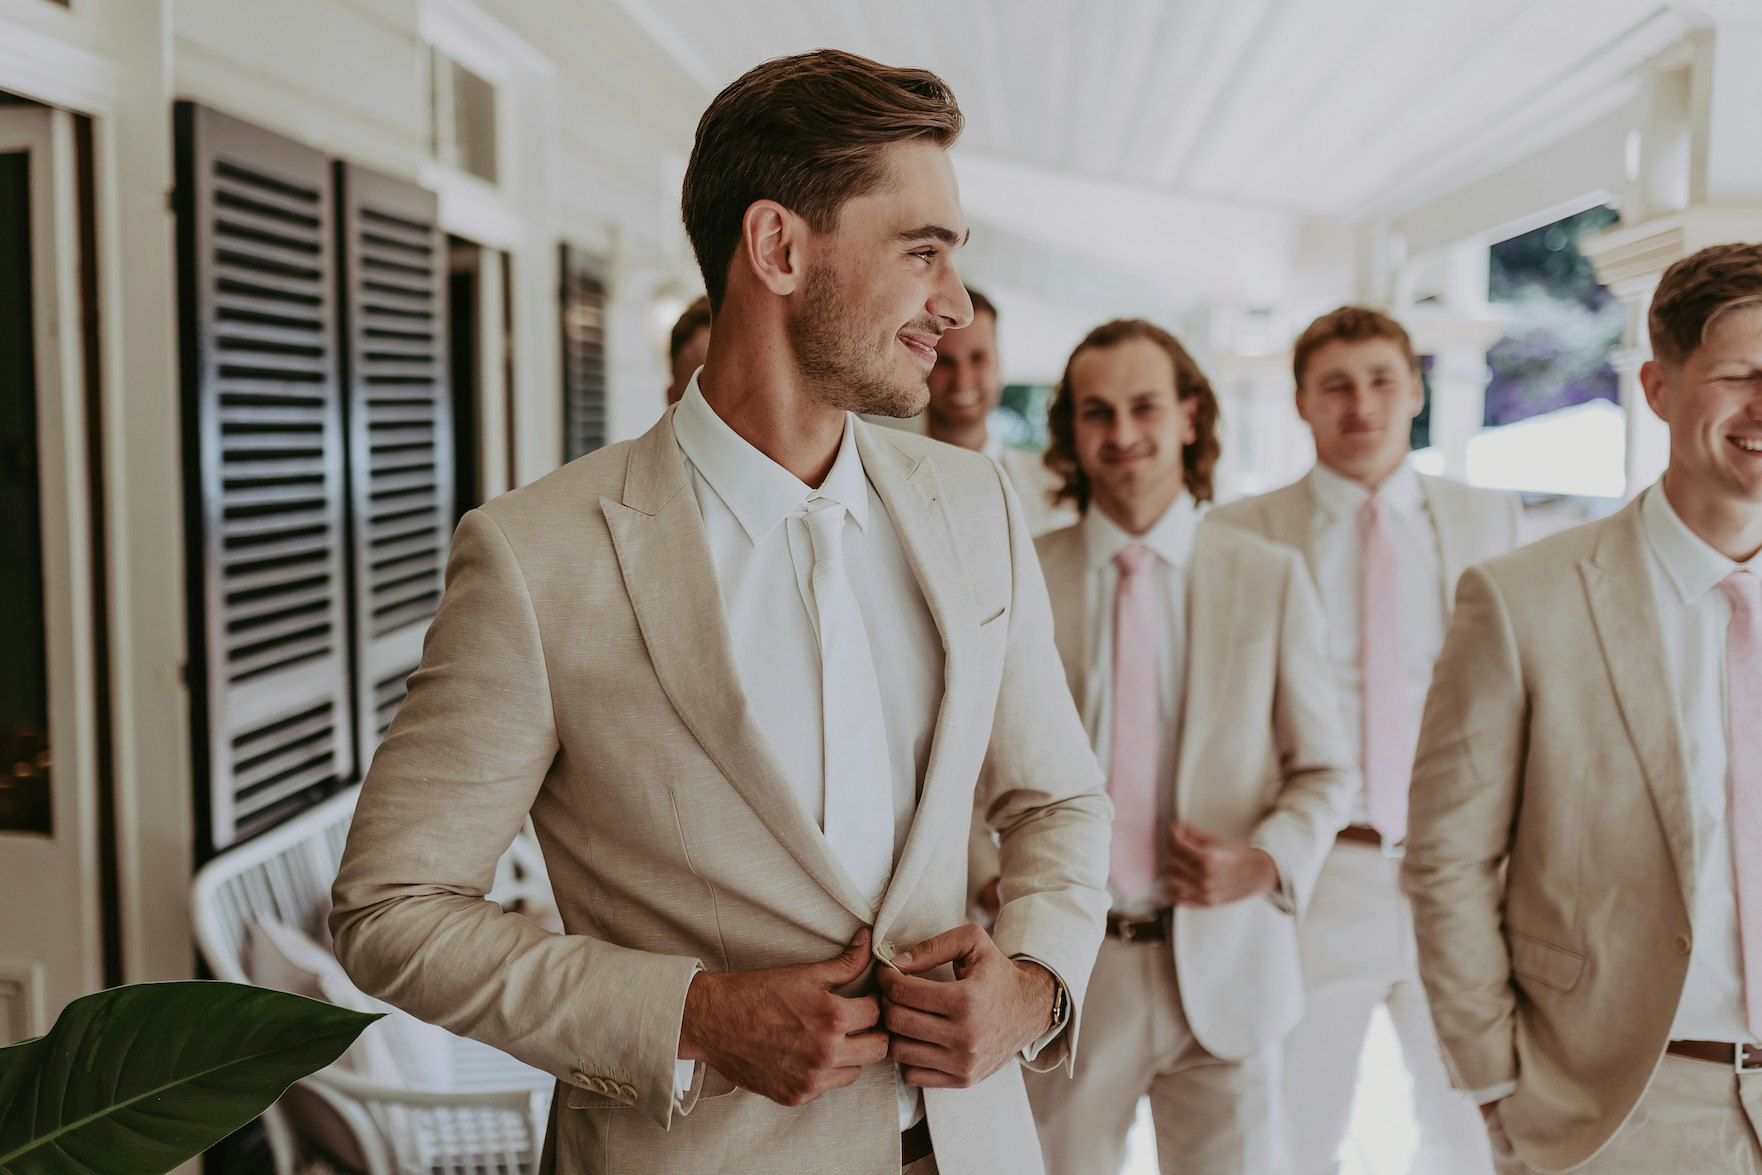 Groom doing buttons of jacket up